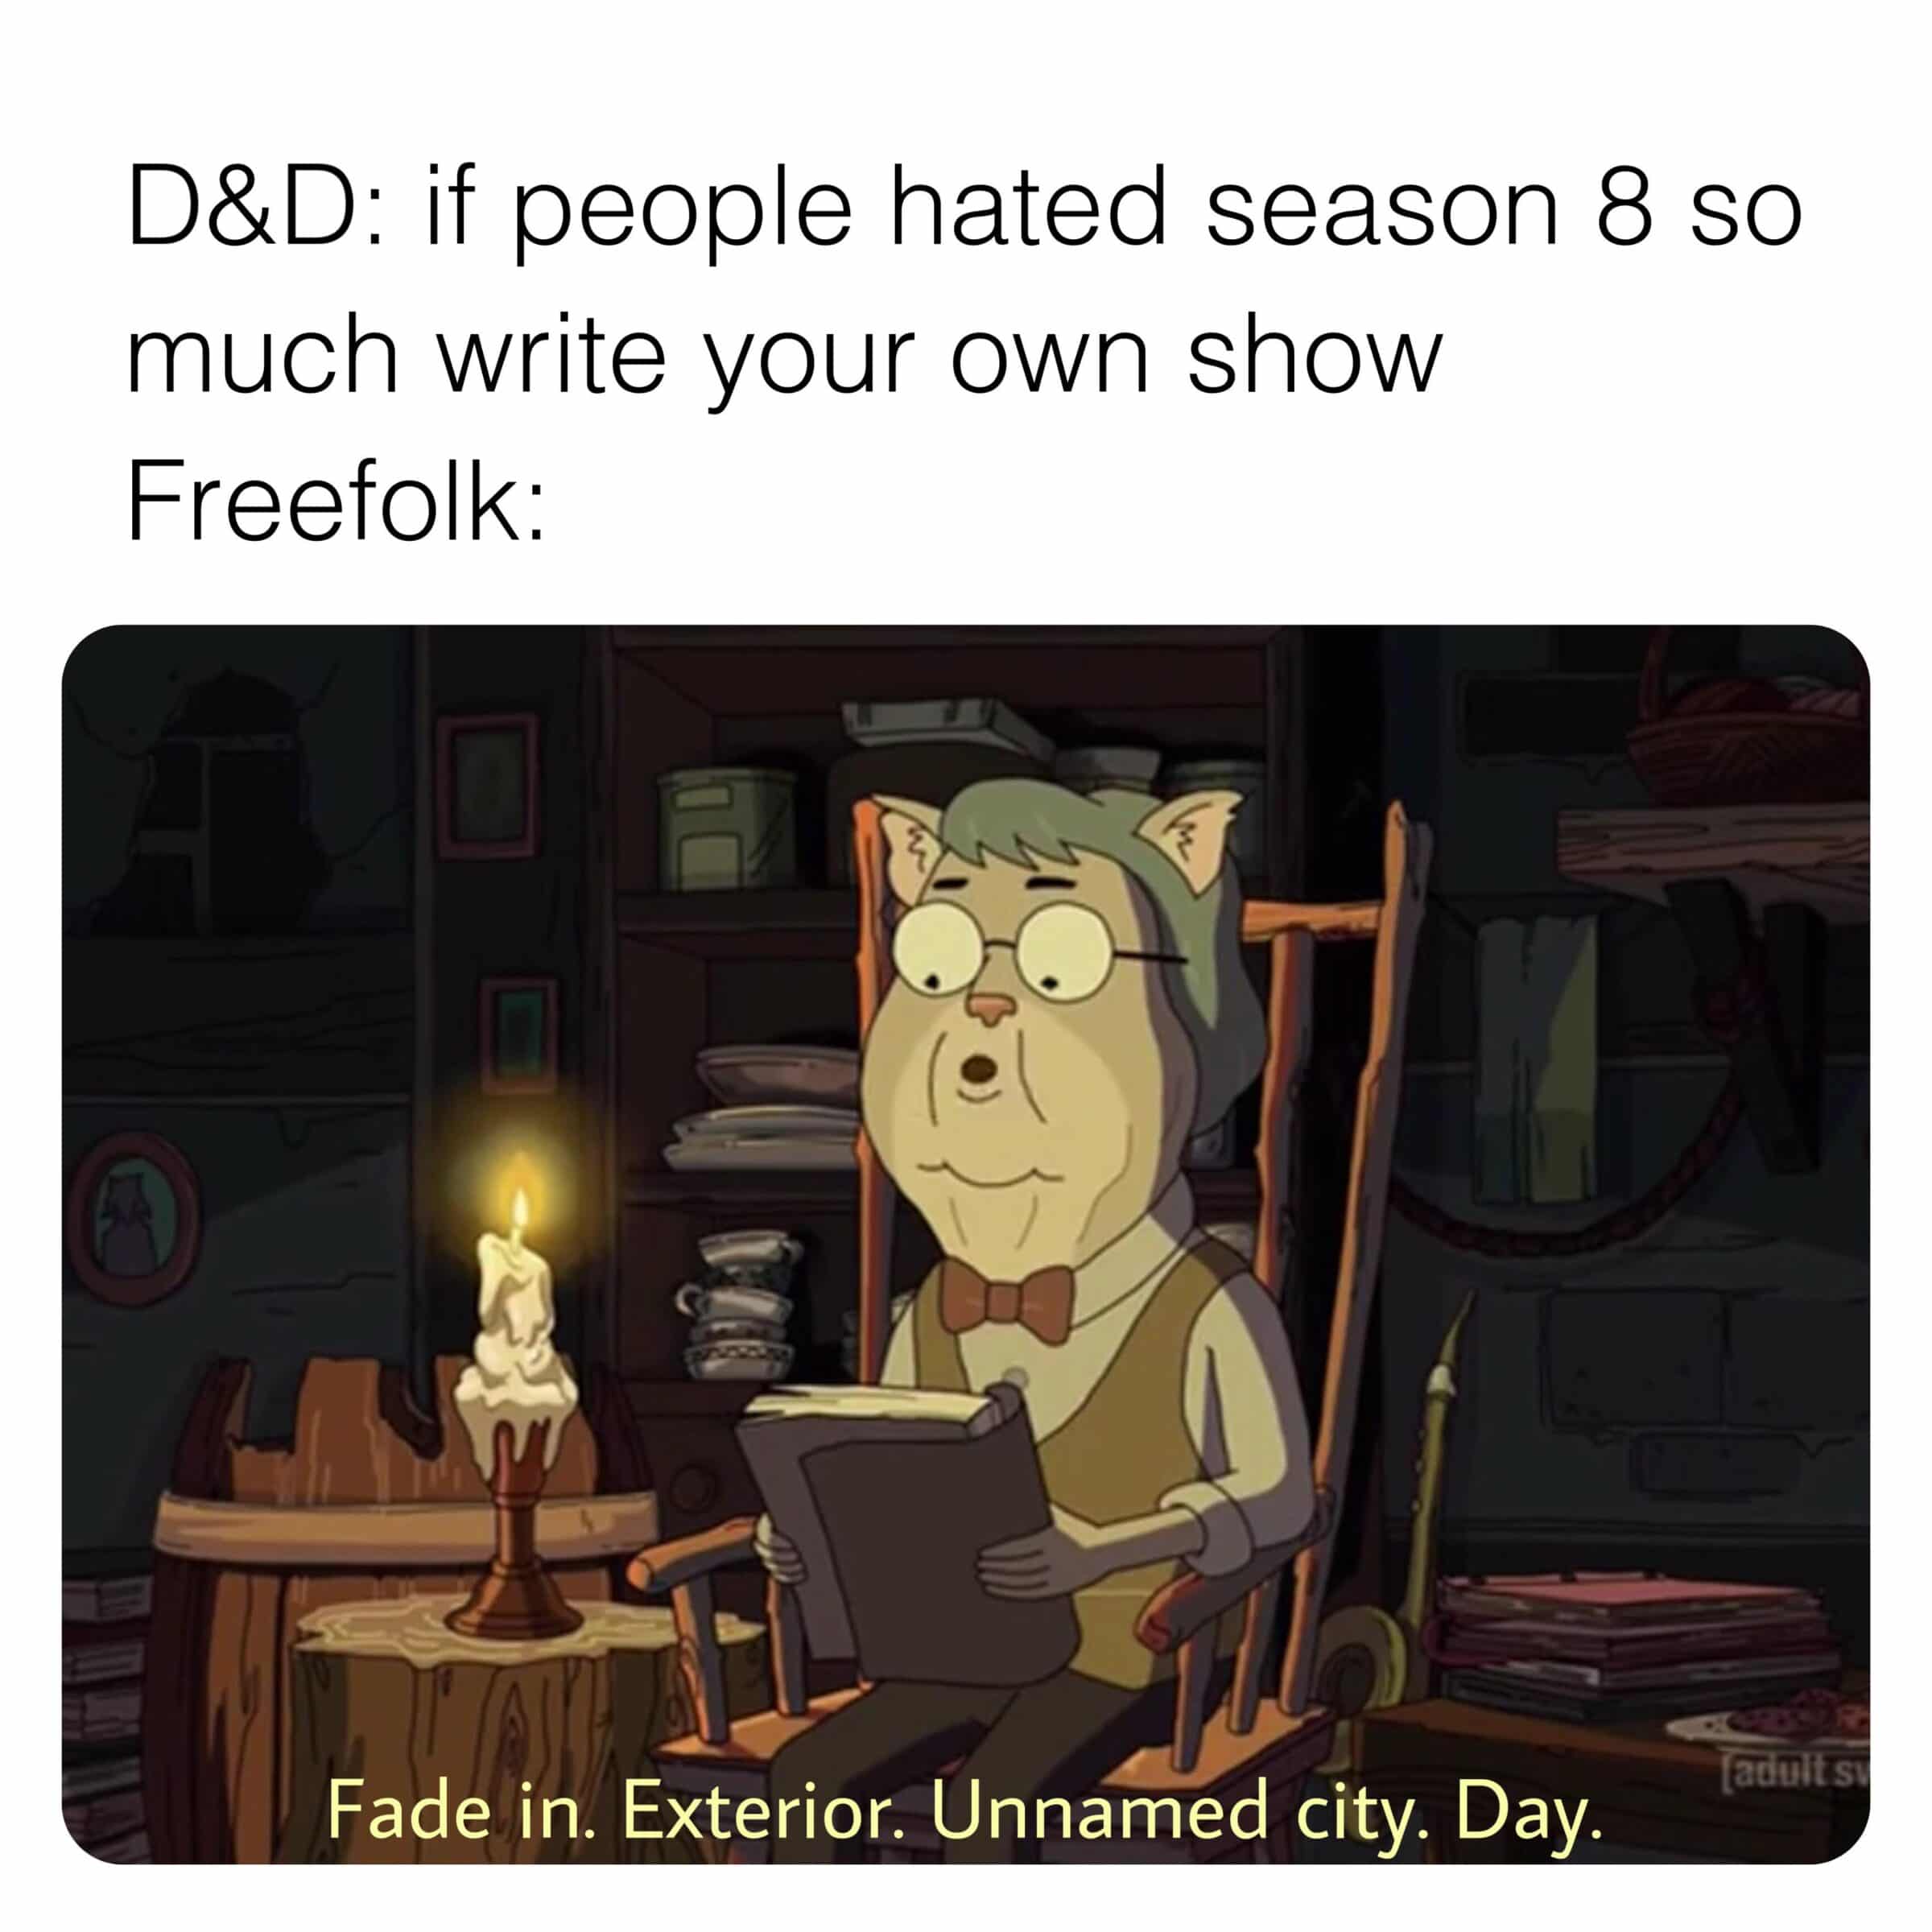 Ironborn, Jamie, Bran, Jon, Game, Davos Game of thrones memes Ironborn, Jamie, Bran, Jon, Game, Davos text: D&D: if people hated season 8 so much write your own show Freefolk: Fade in. Exterior. Unnamed city. Day. 